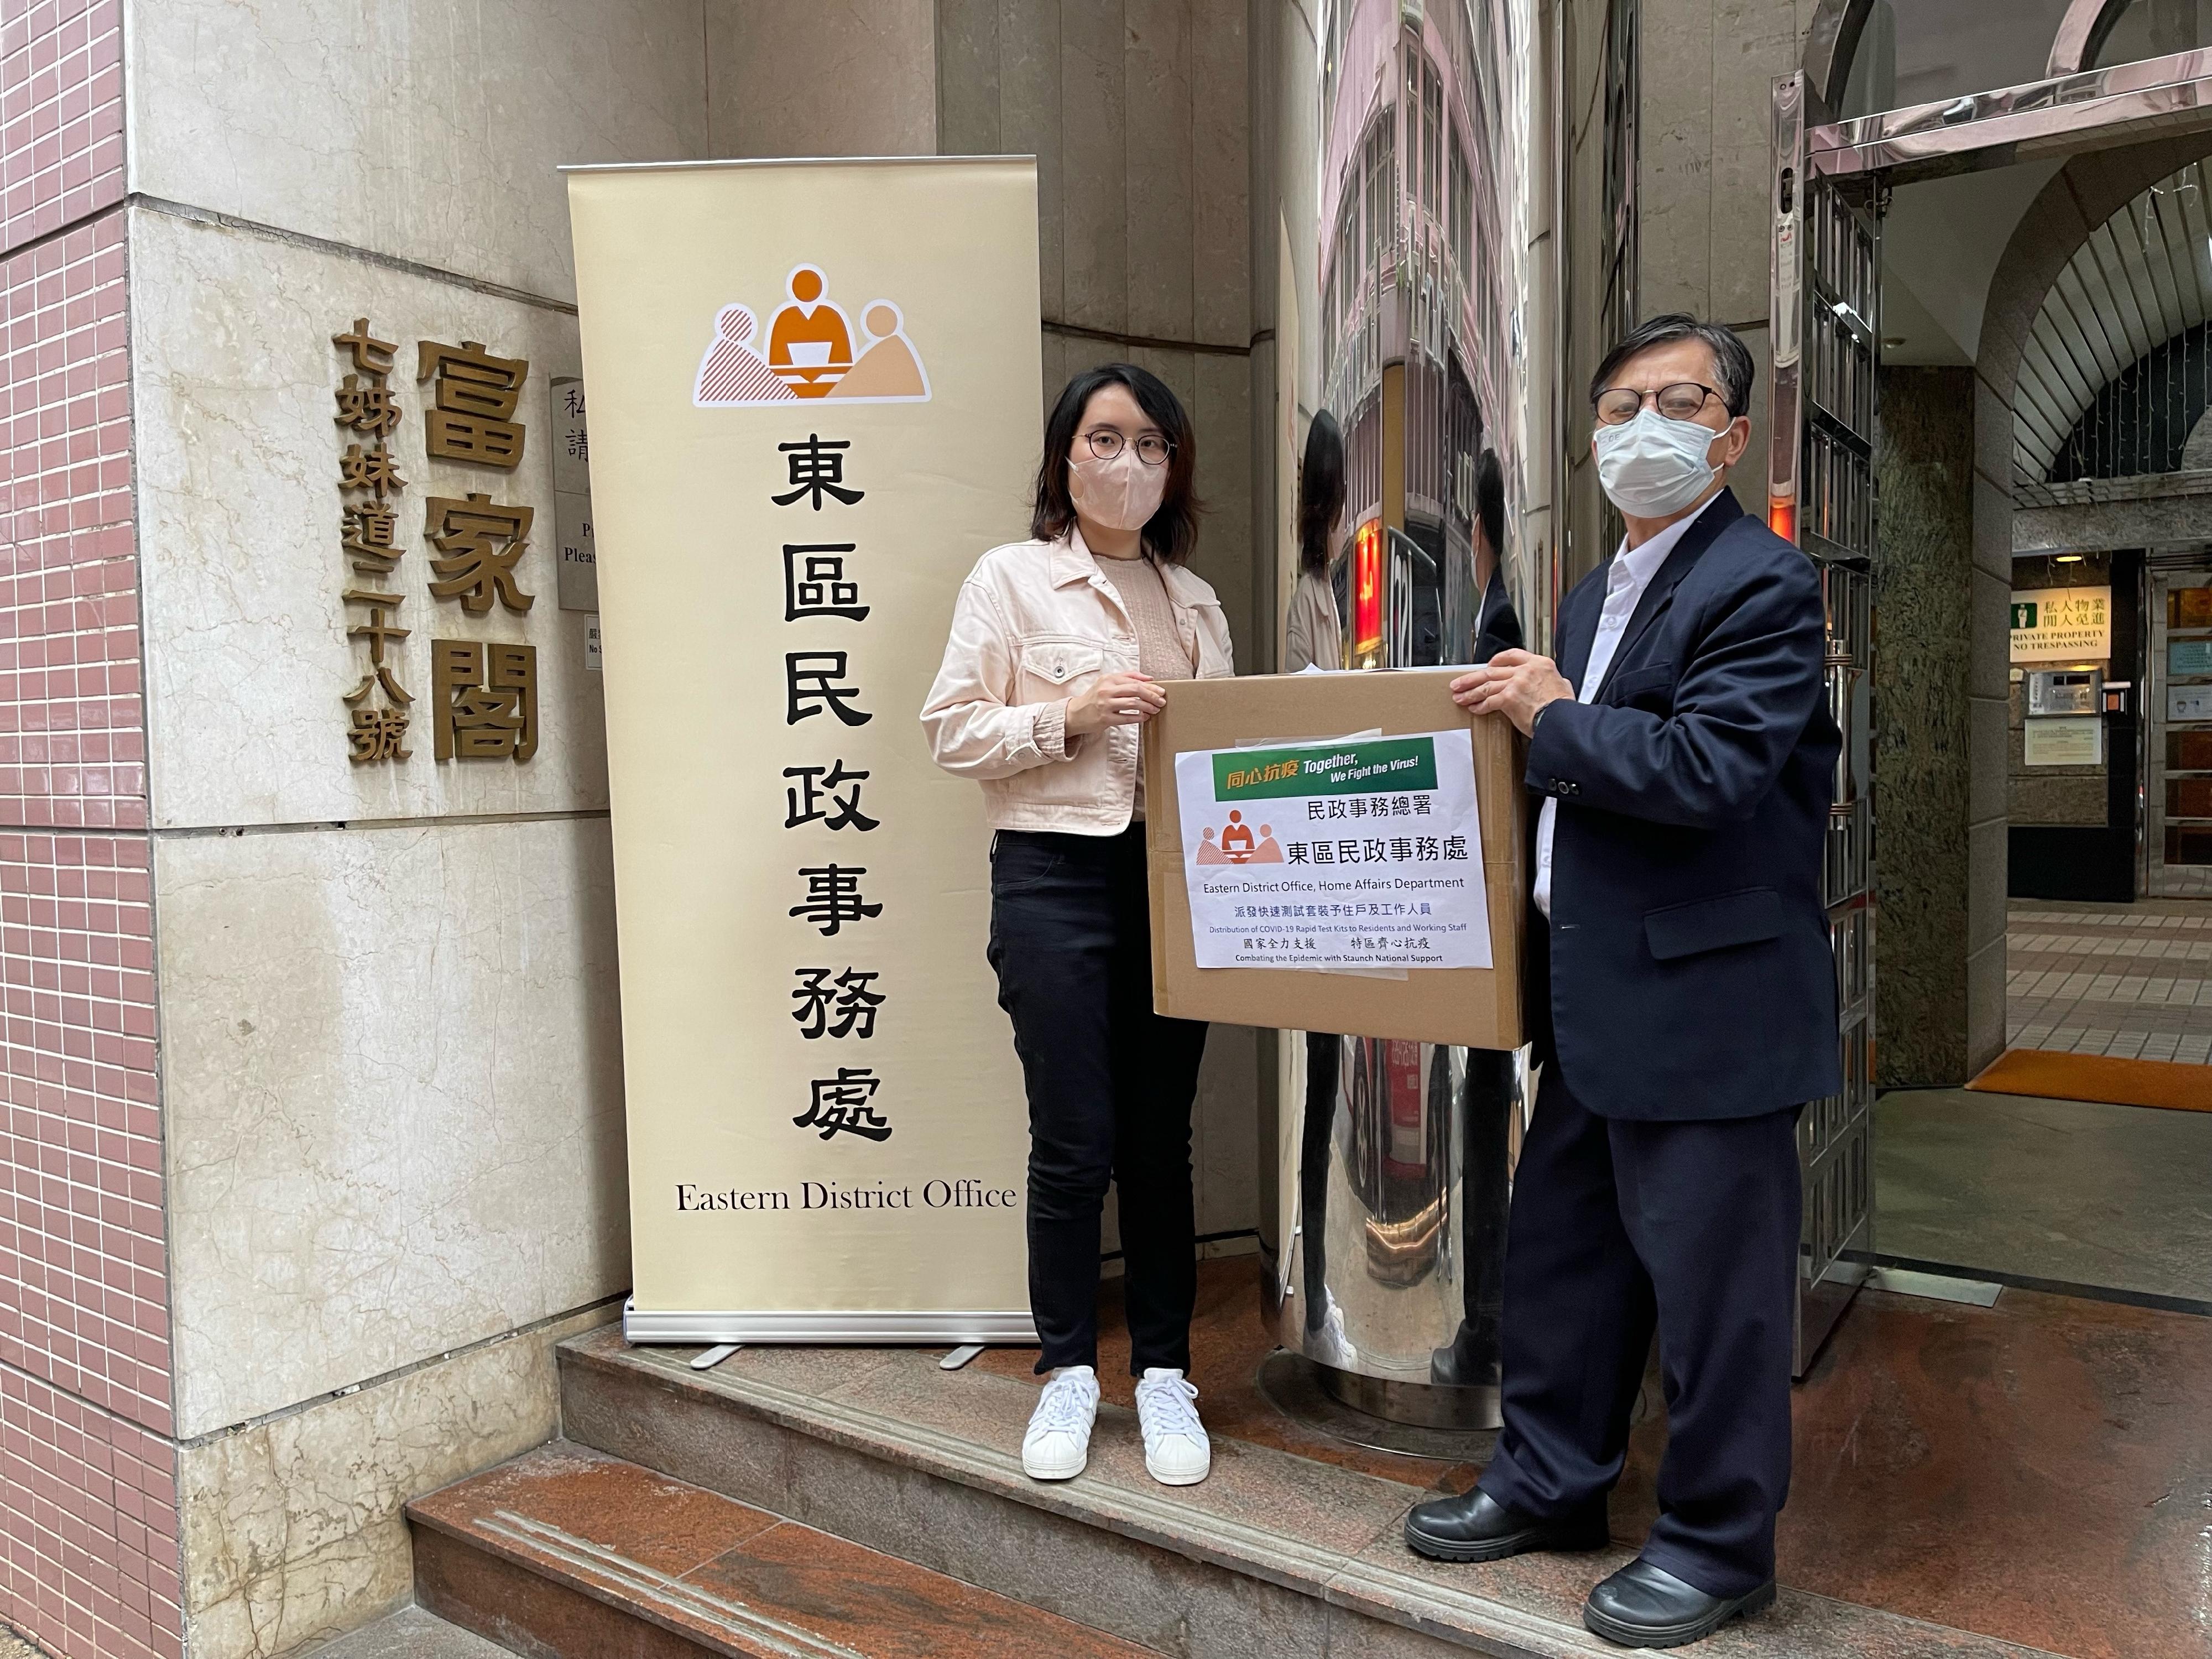 The Eastern District Office today (March 25) distributed COVID-19 rapid test kits to households, cleansing workers and property management staff living and working in Wealthy Court for voluntary testing through the property management company.